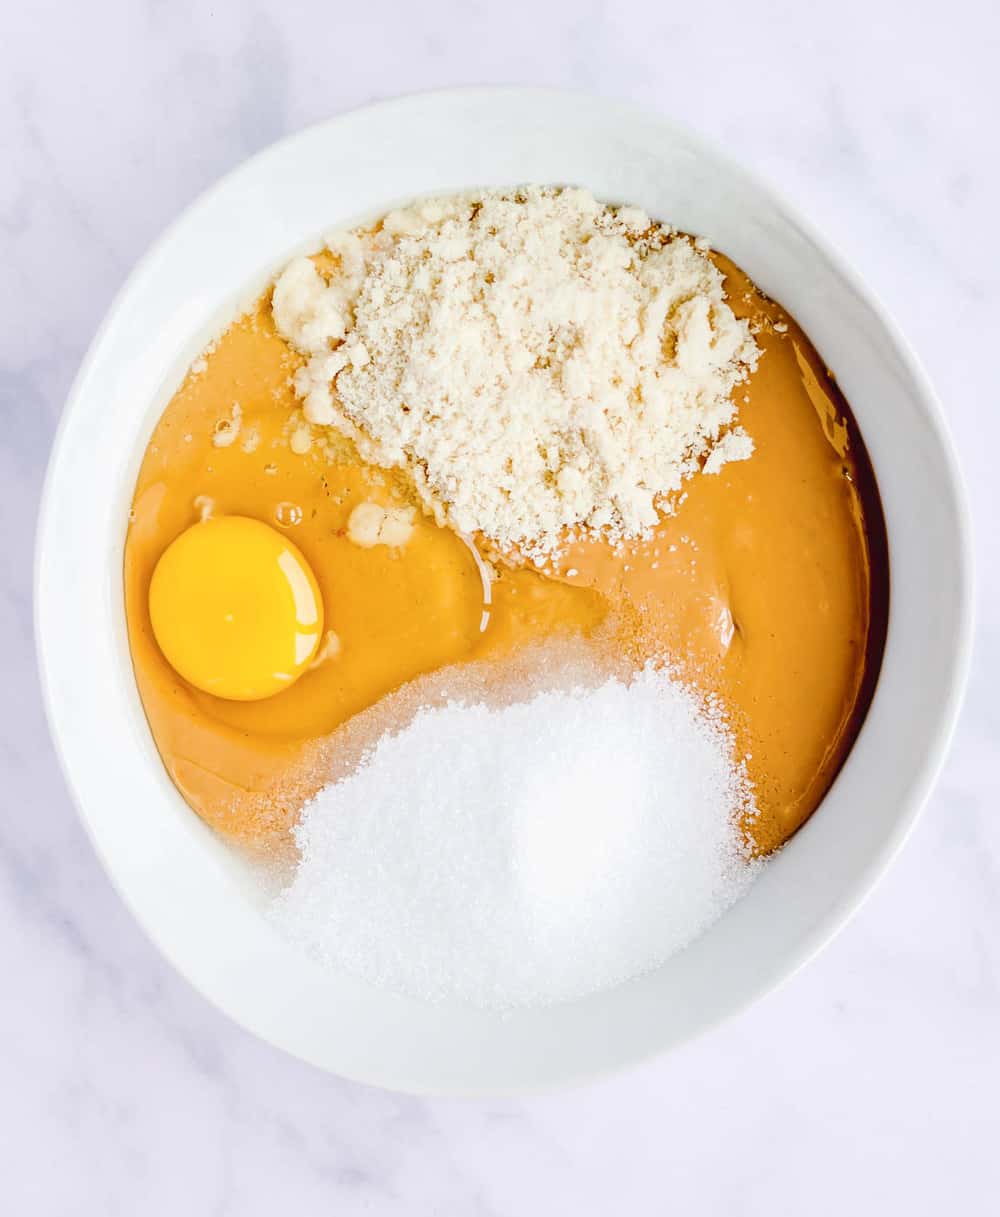 iIngredients mixed together in bowl - eggs, flour, peanut butter.